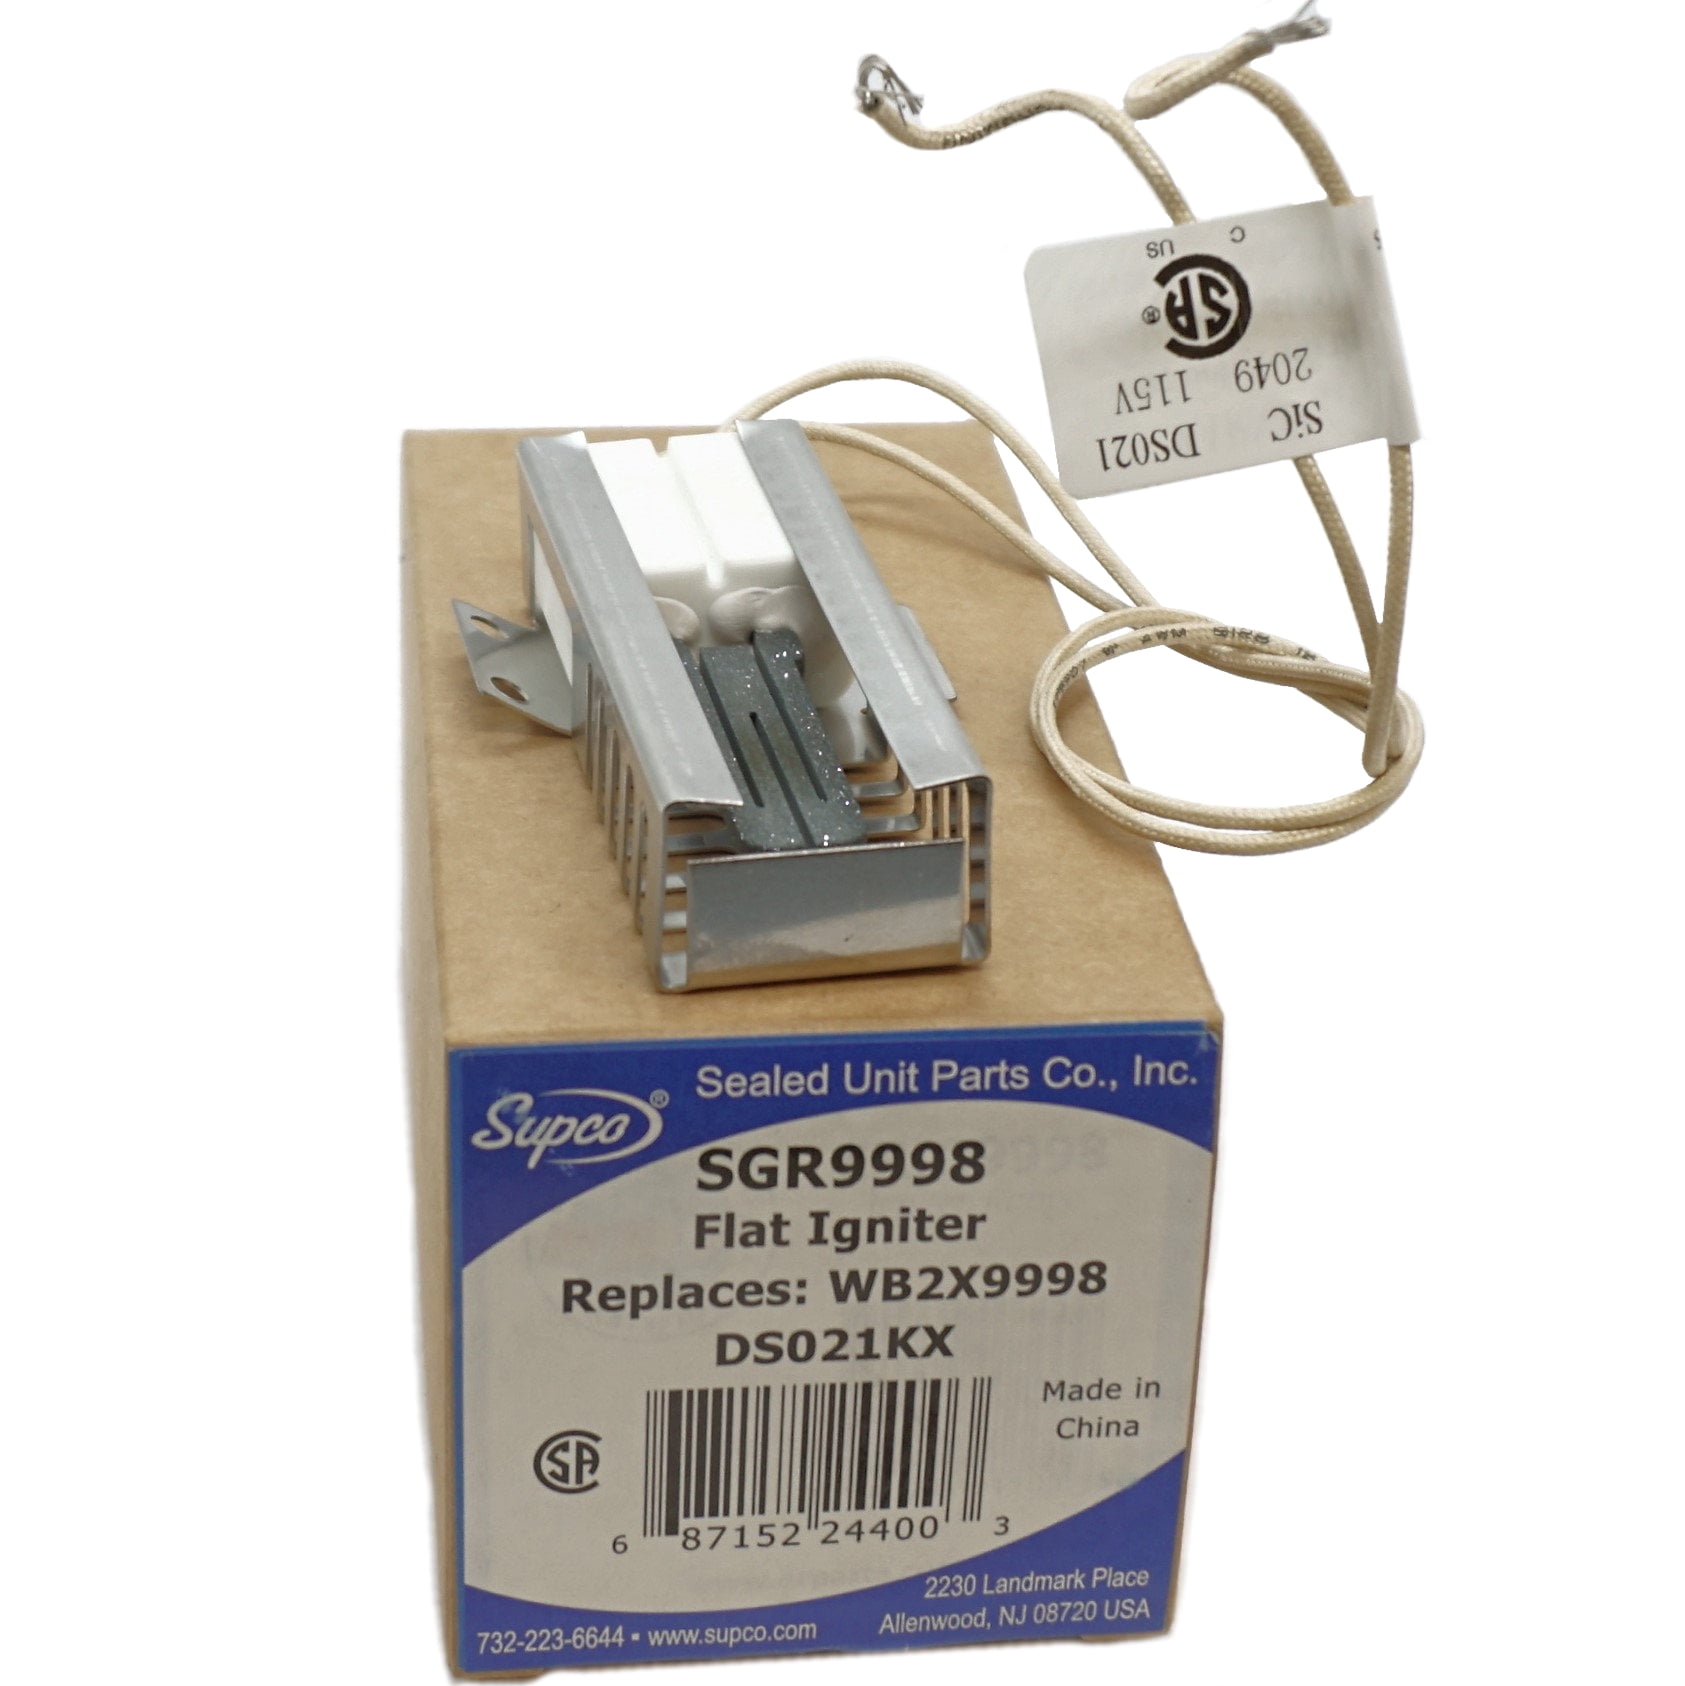 Hotpoint Gas Oven Igniter replaces GE WB2X9998 